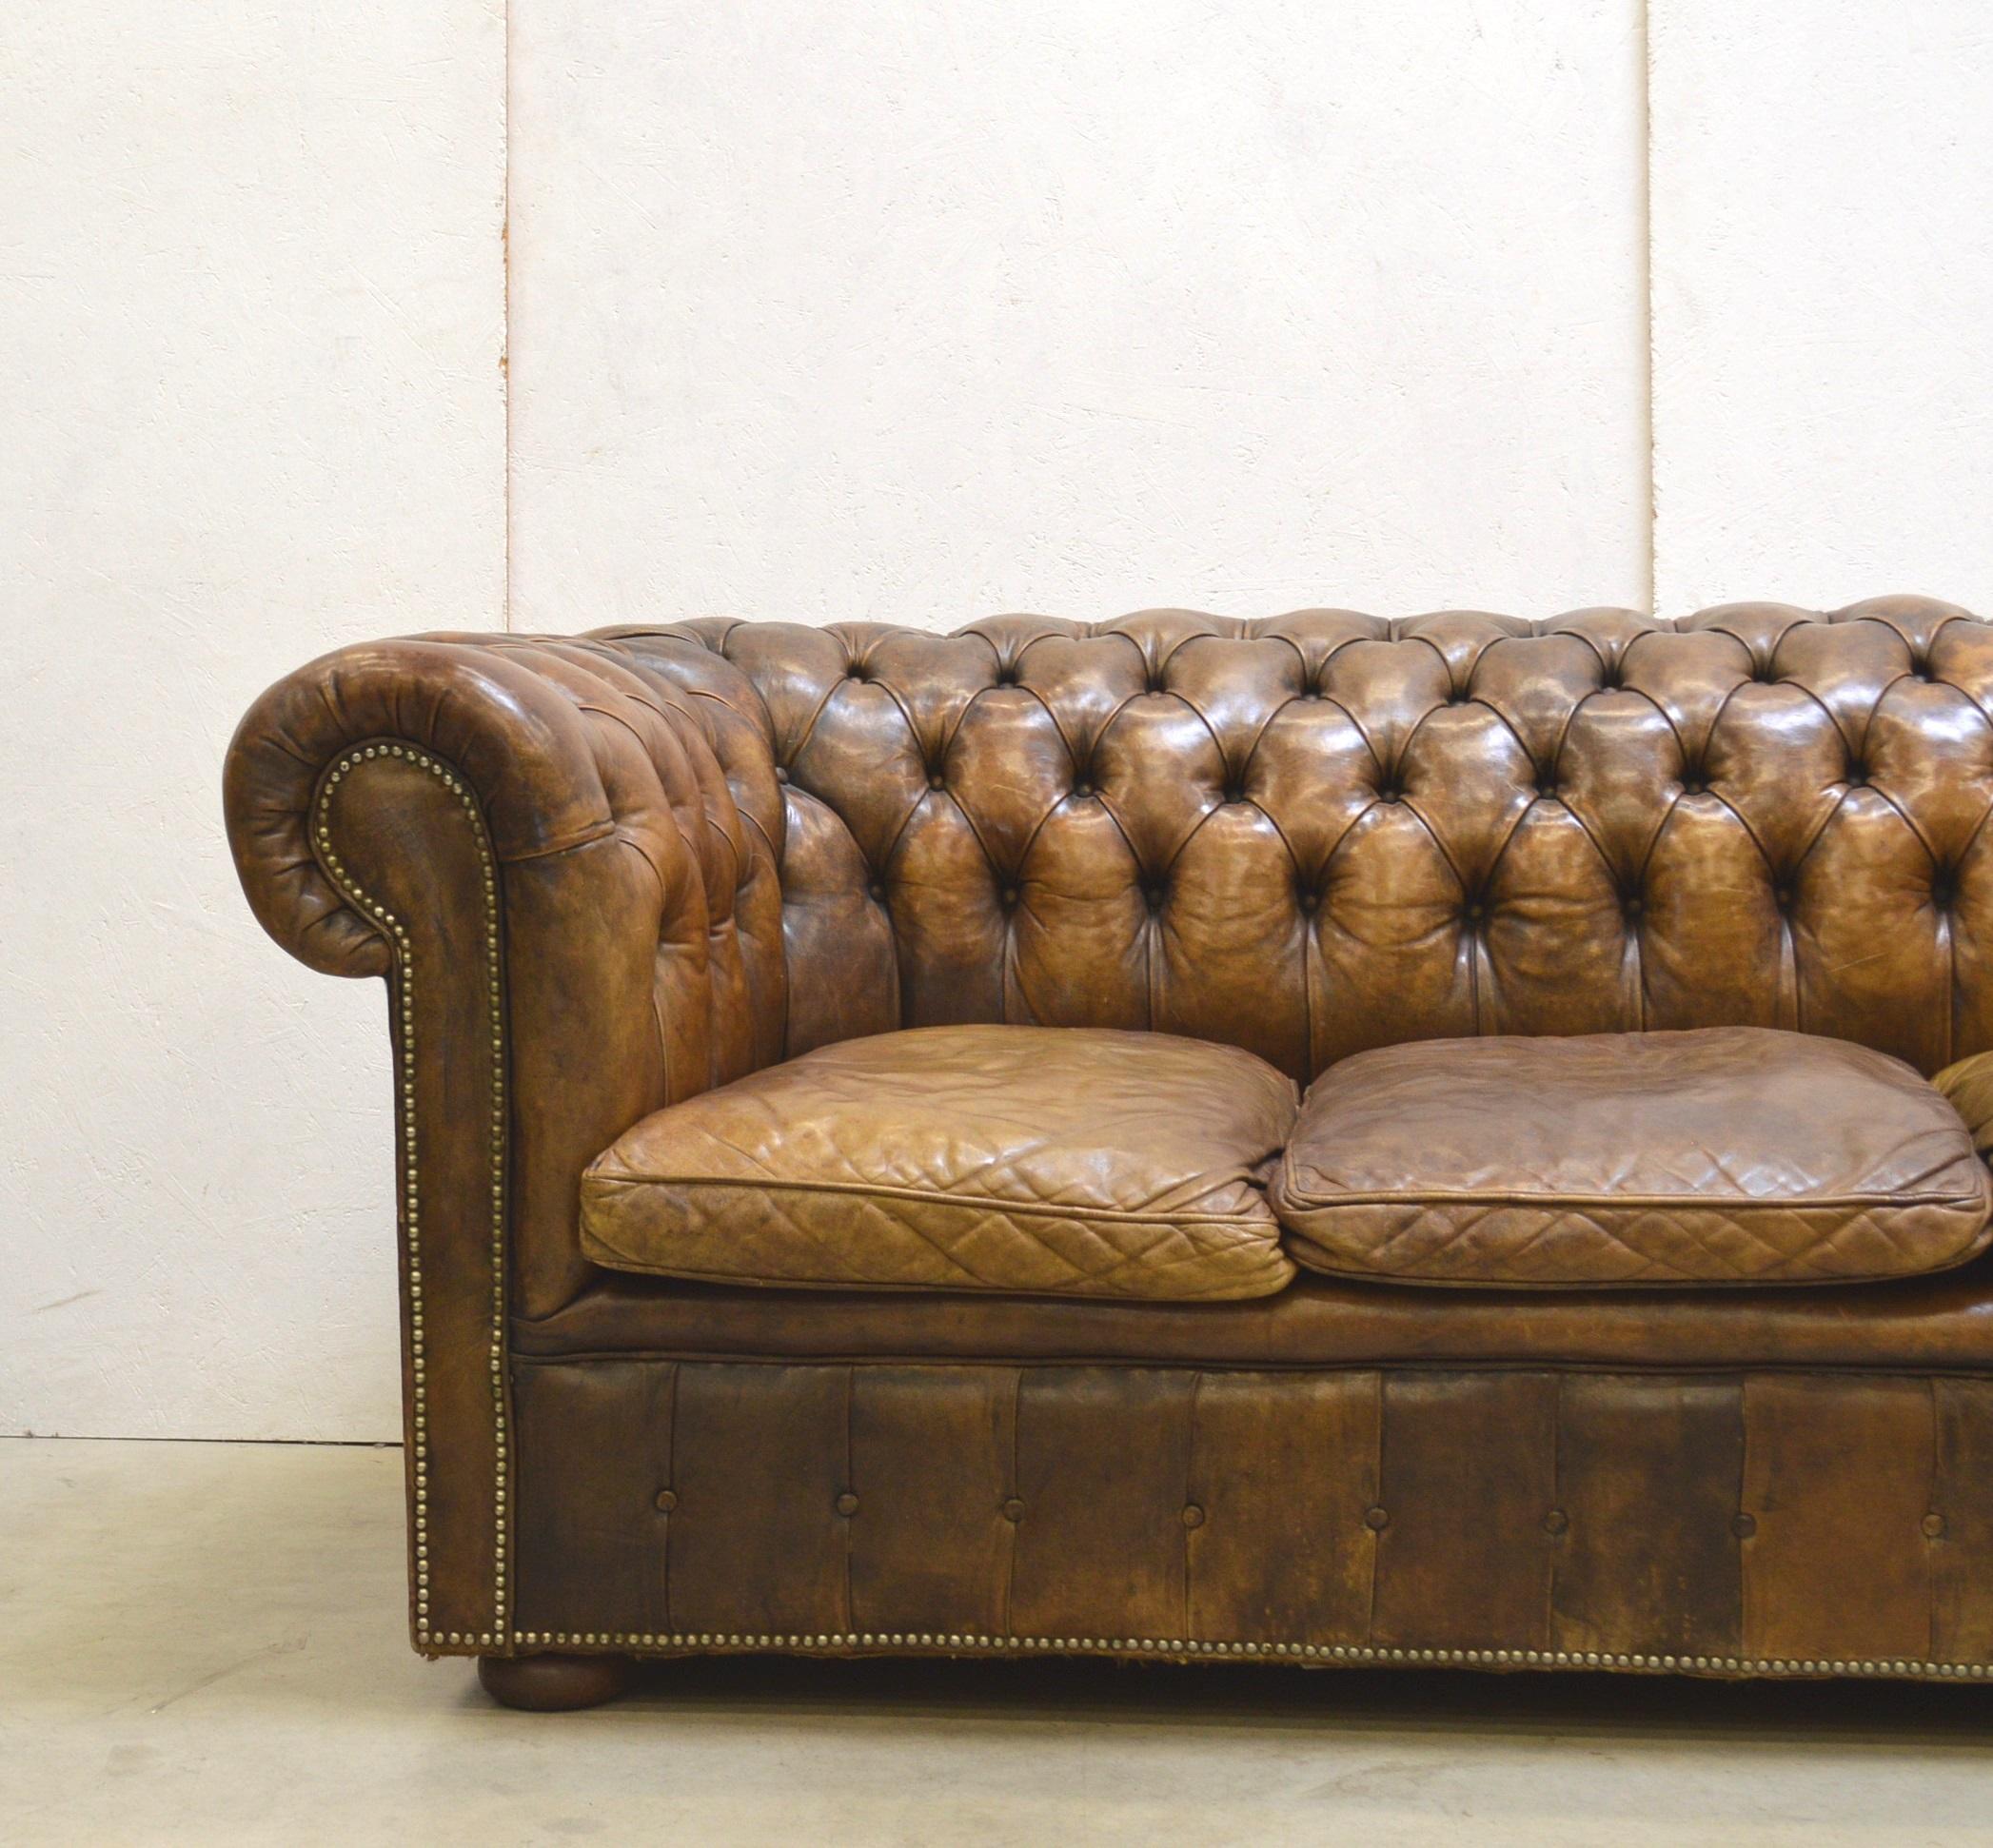 Vintage Chesterfield sofa original made in England with an amazing patina.
The piece comes with a very thick hand dyed leather, the cushions are filled with duck feathers.

A hand crafted masterpiece!

Dimensons are: 

Width - 206cm
Depth -